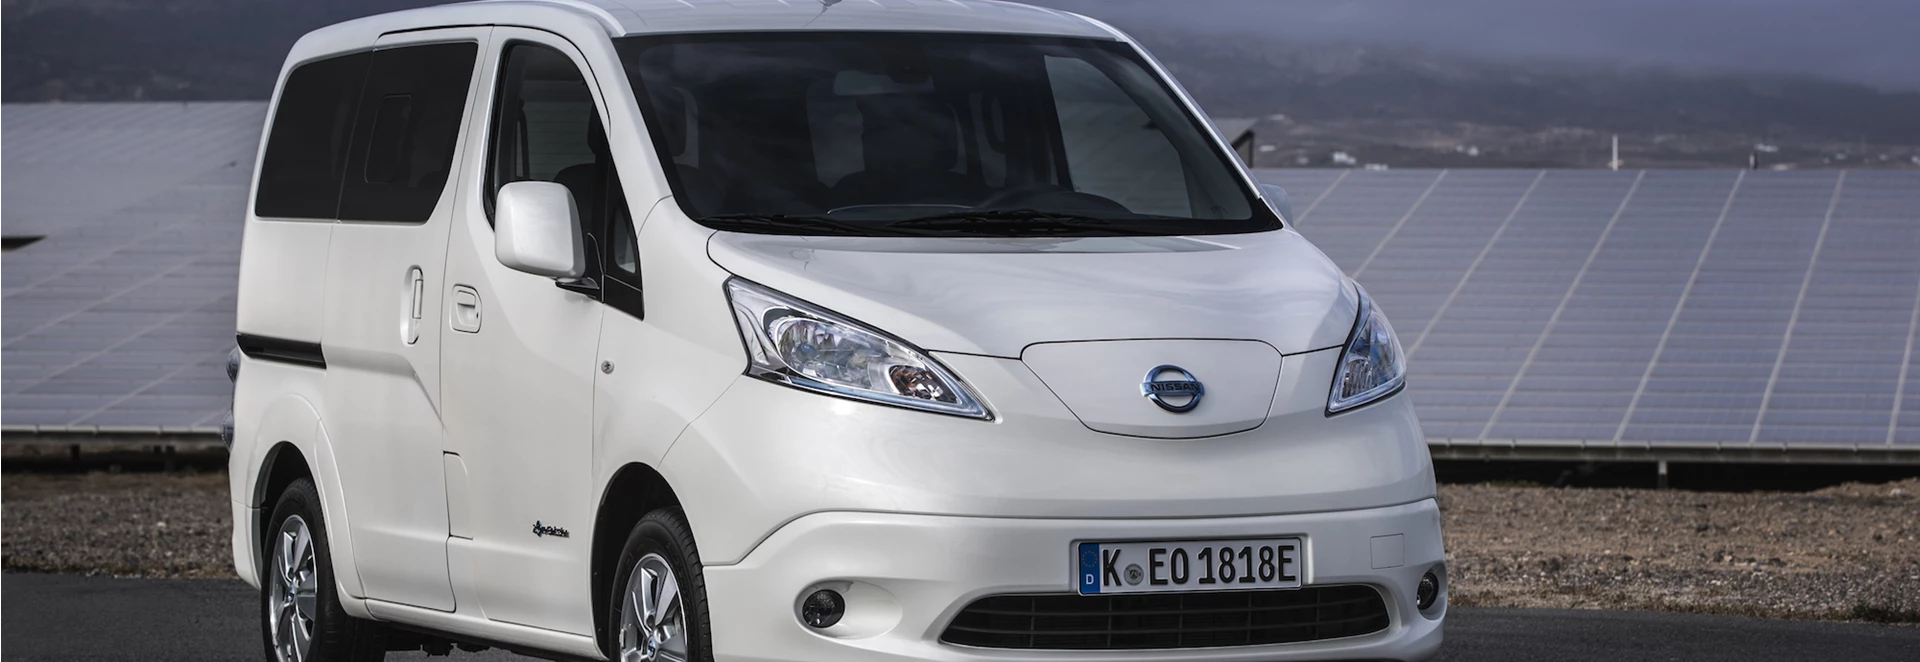 Nissan e-NV200 updated for 2019